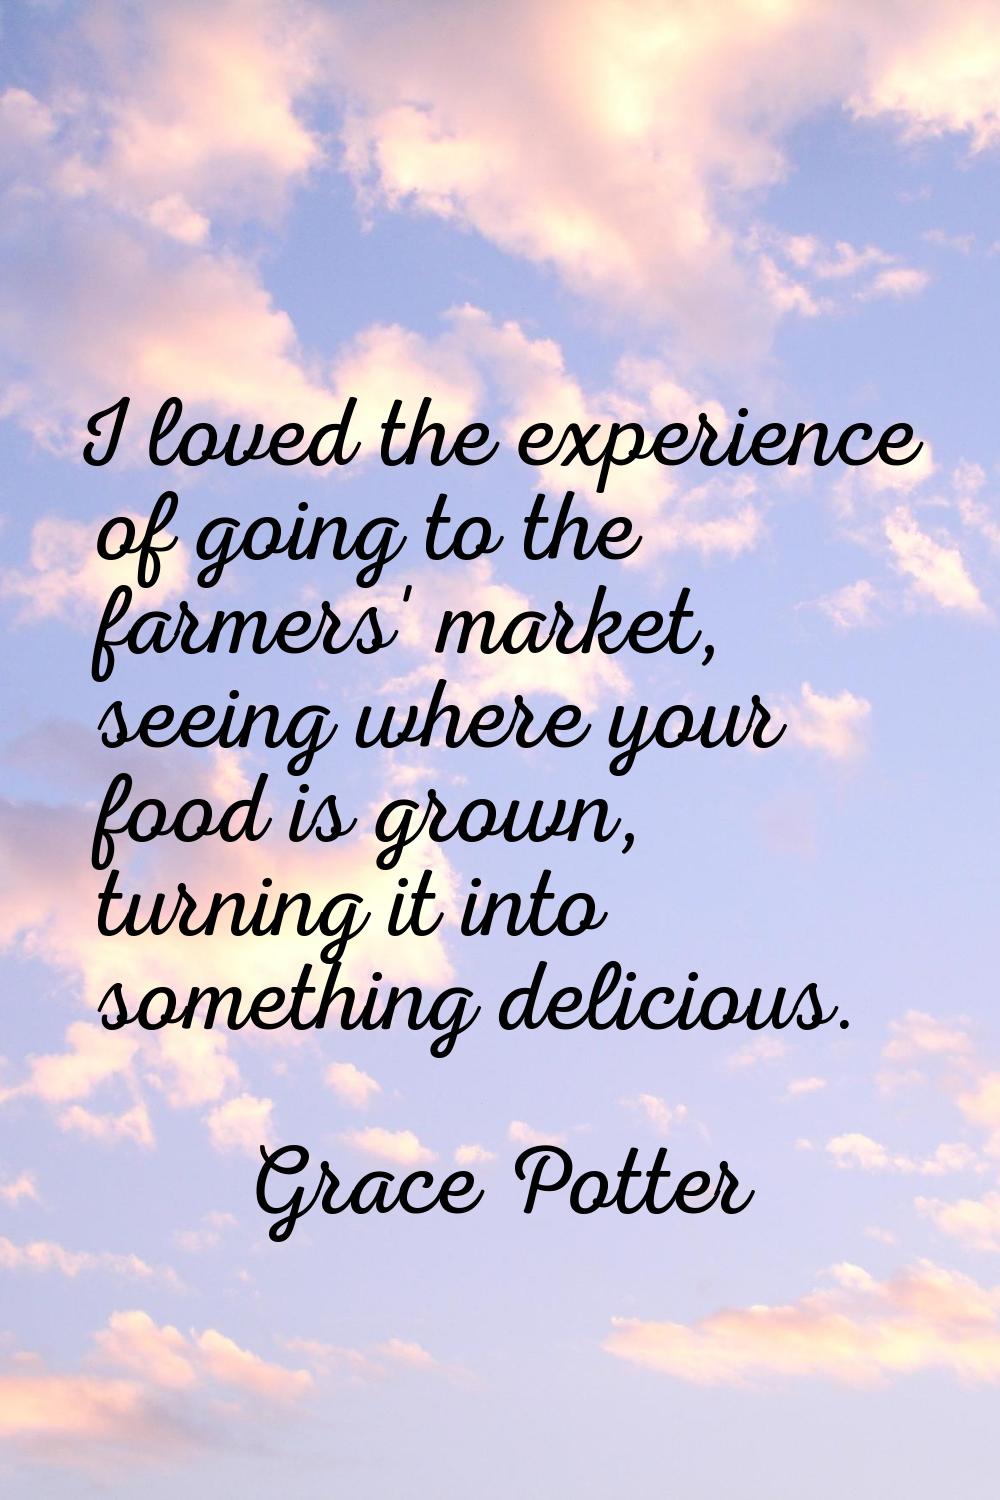 I loved the experience of going to the farmers' market, seeing where your food is grown, turning it